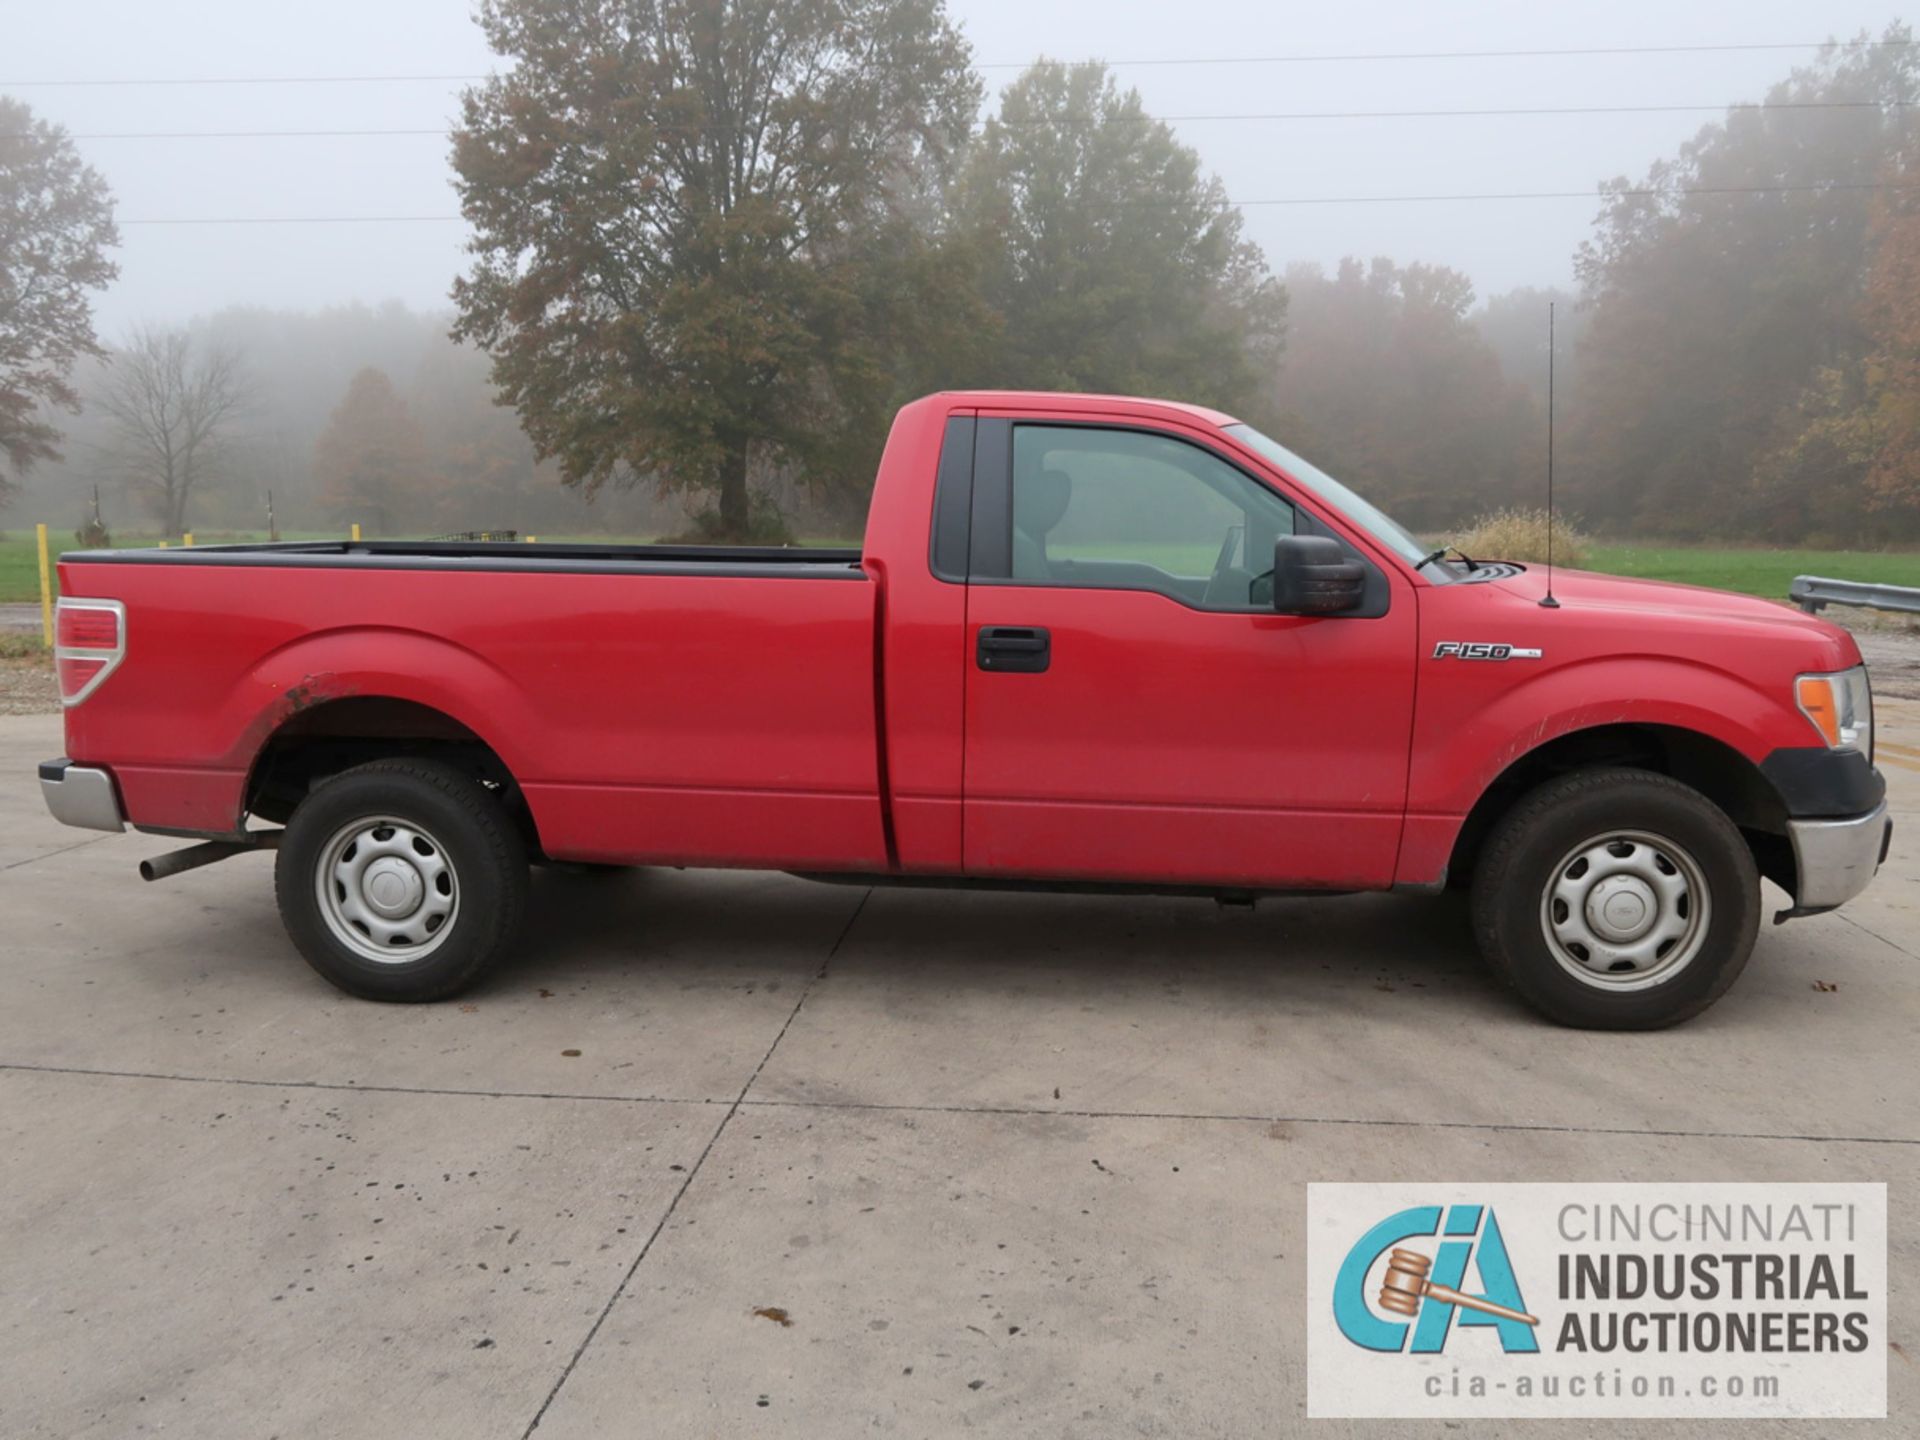 2010 FORD F-150 PICK UP TRUCK; VIN # 1FTMF1CW3AKE02719, 4.62 TRITON GAS ENGINE, AUTOMATIC - Image 4 of 12